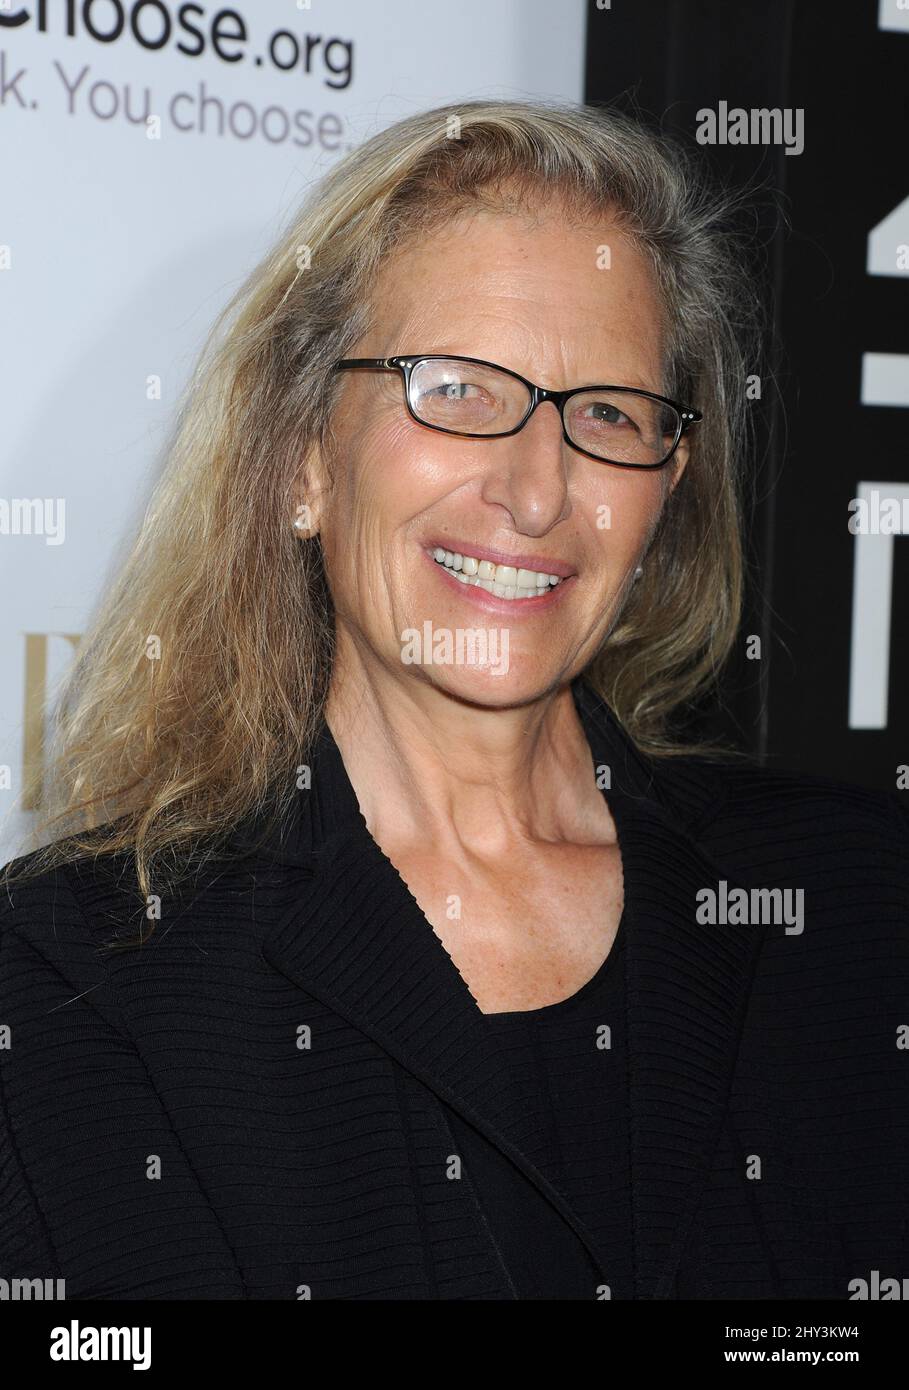 Annie Leibovitz arrives at Annie Leibovitz's book launch party hosted by Vanity Fair, Leon Max, and Benedikt Taschen at the Chateau Marmont, in West Hollywood, Calif. Stock Photo